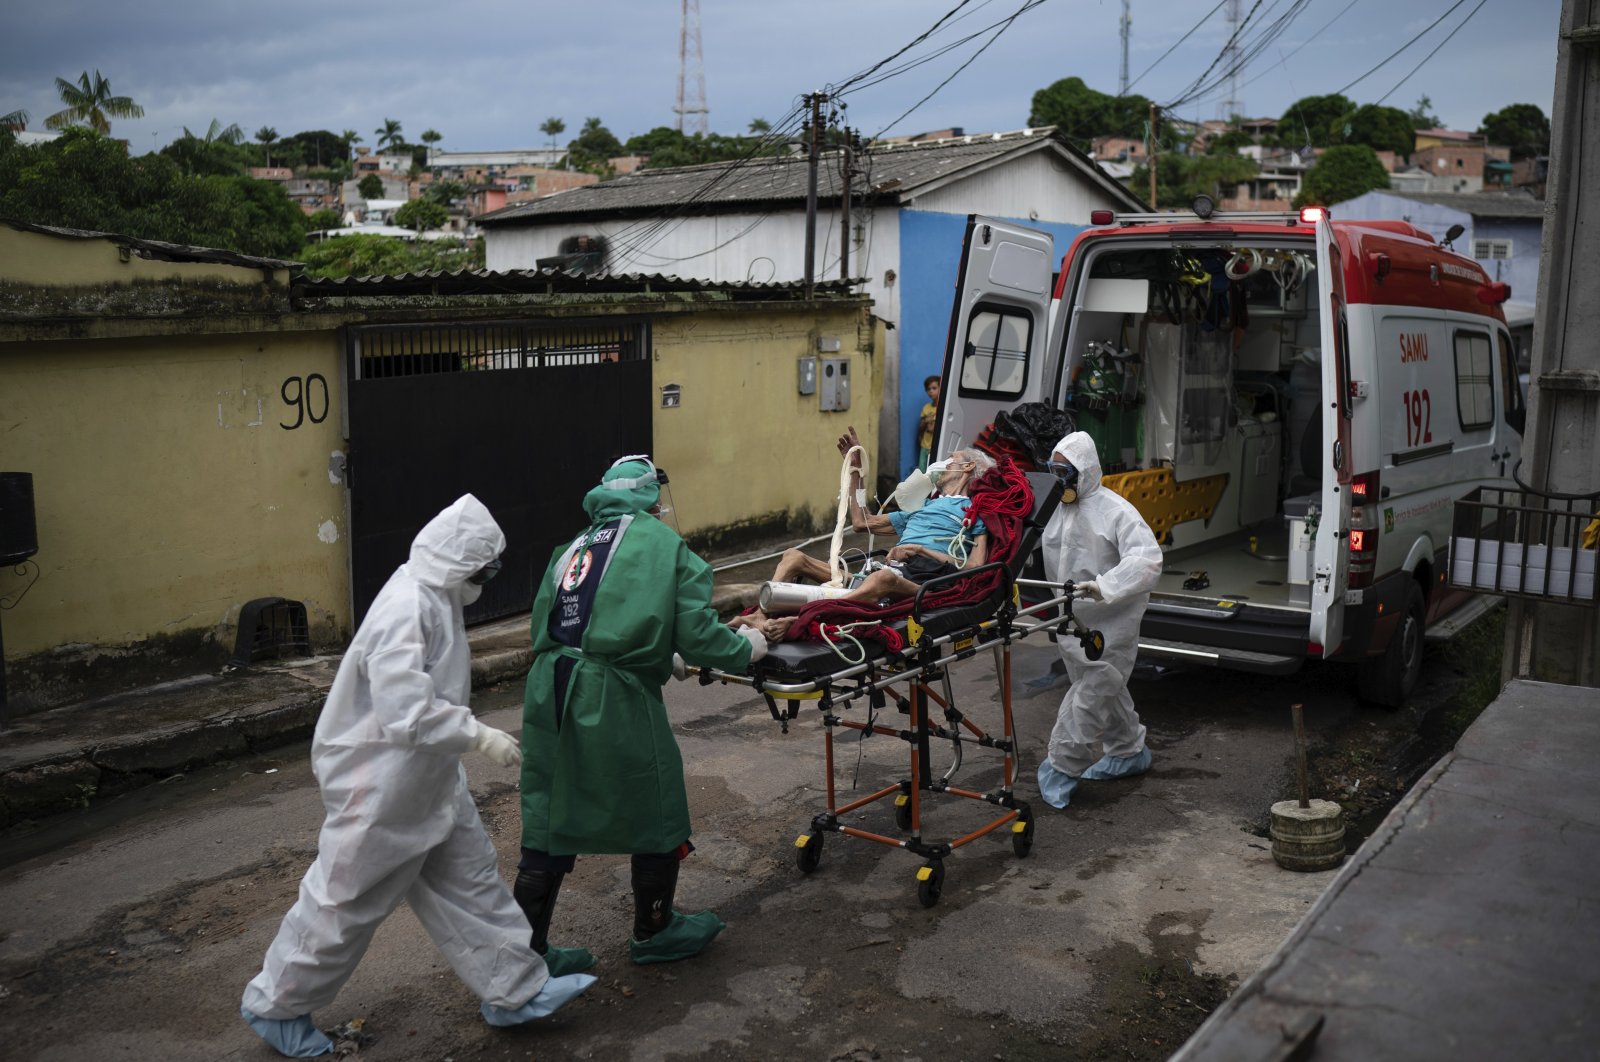 Emergency workers transfer an elderly patient, suspected of having COVID-19, to a hospital in Manaus, Brazil, Wednesday, May 13, 2020. (AP Photo)